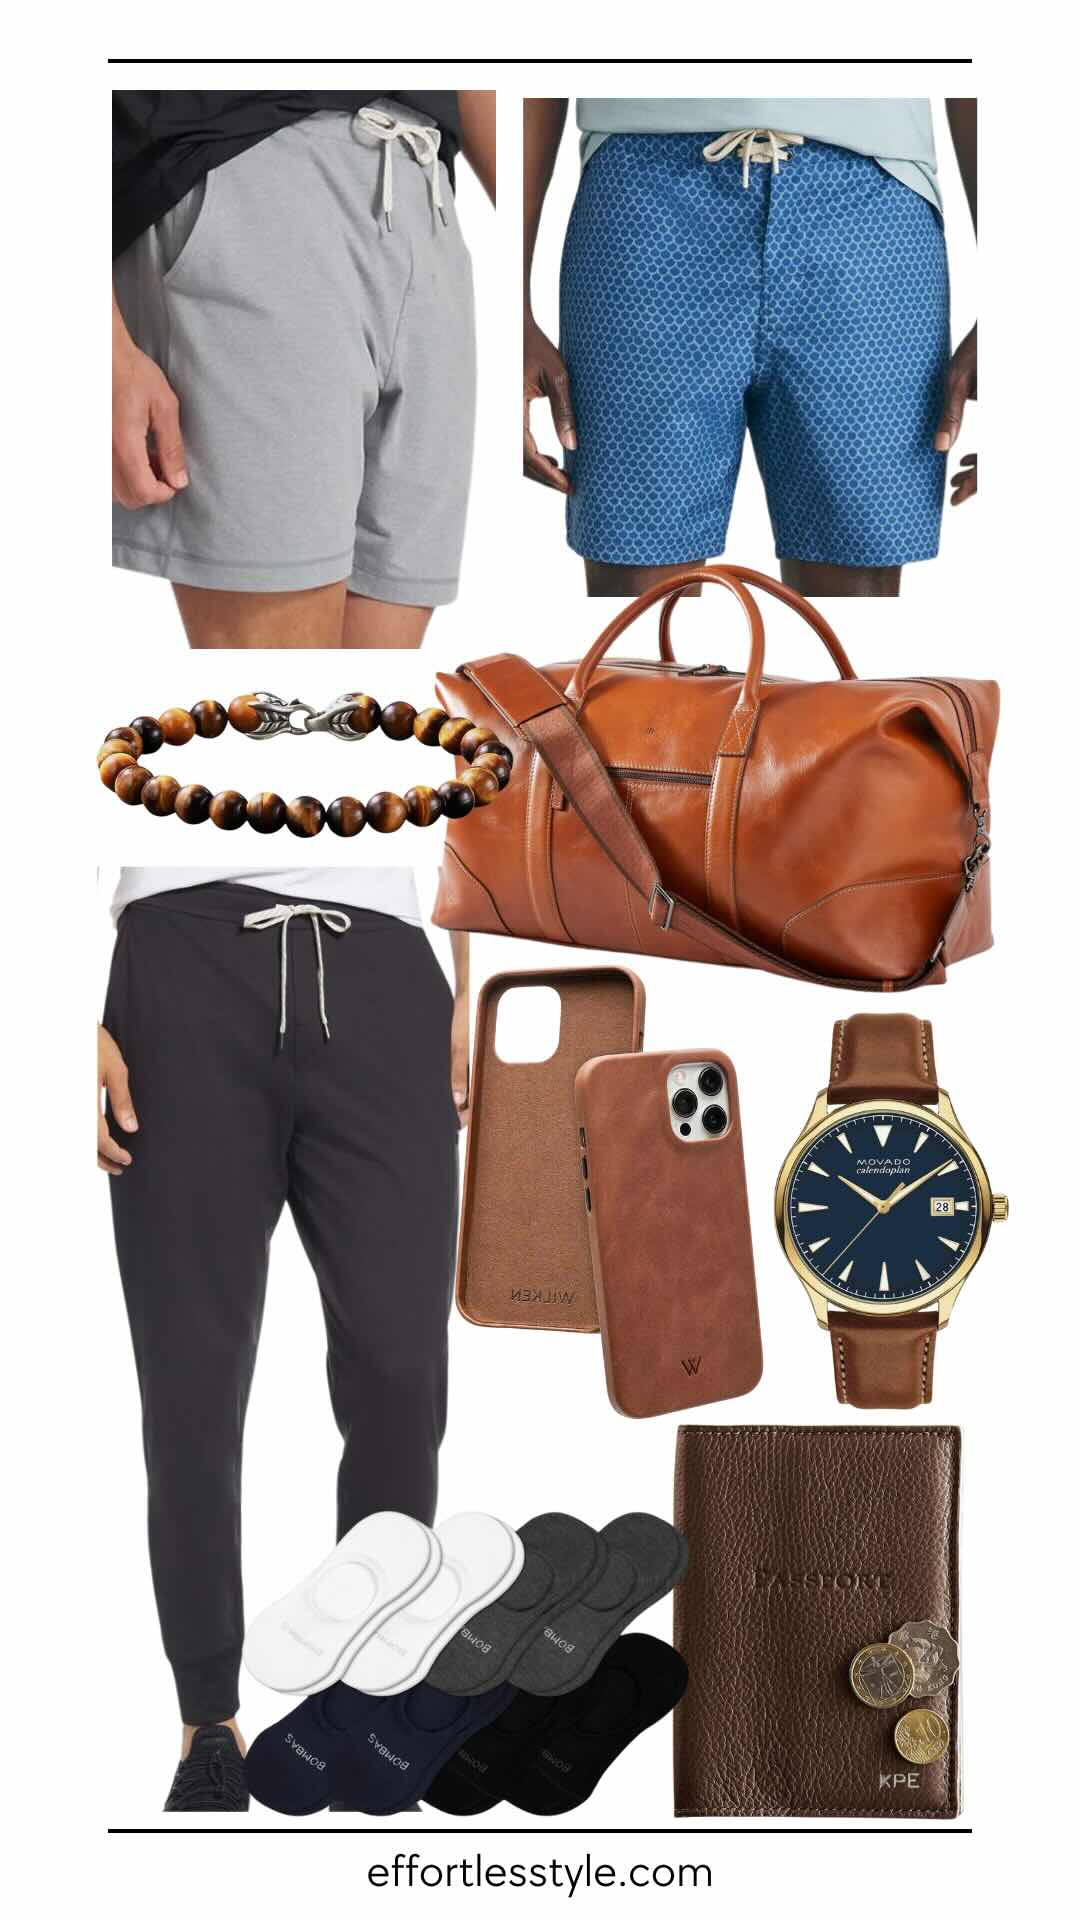 Must Haves From A Stylist For Your Dad what to buy dad for father's day the best Father's Day gift ideas what to buy your dad for Father's Day